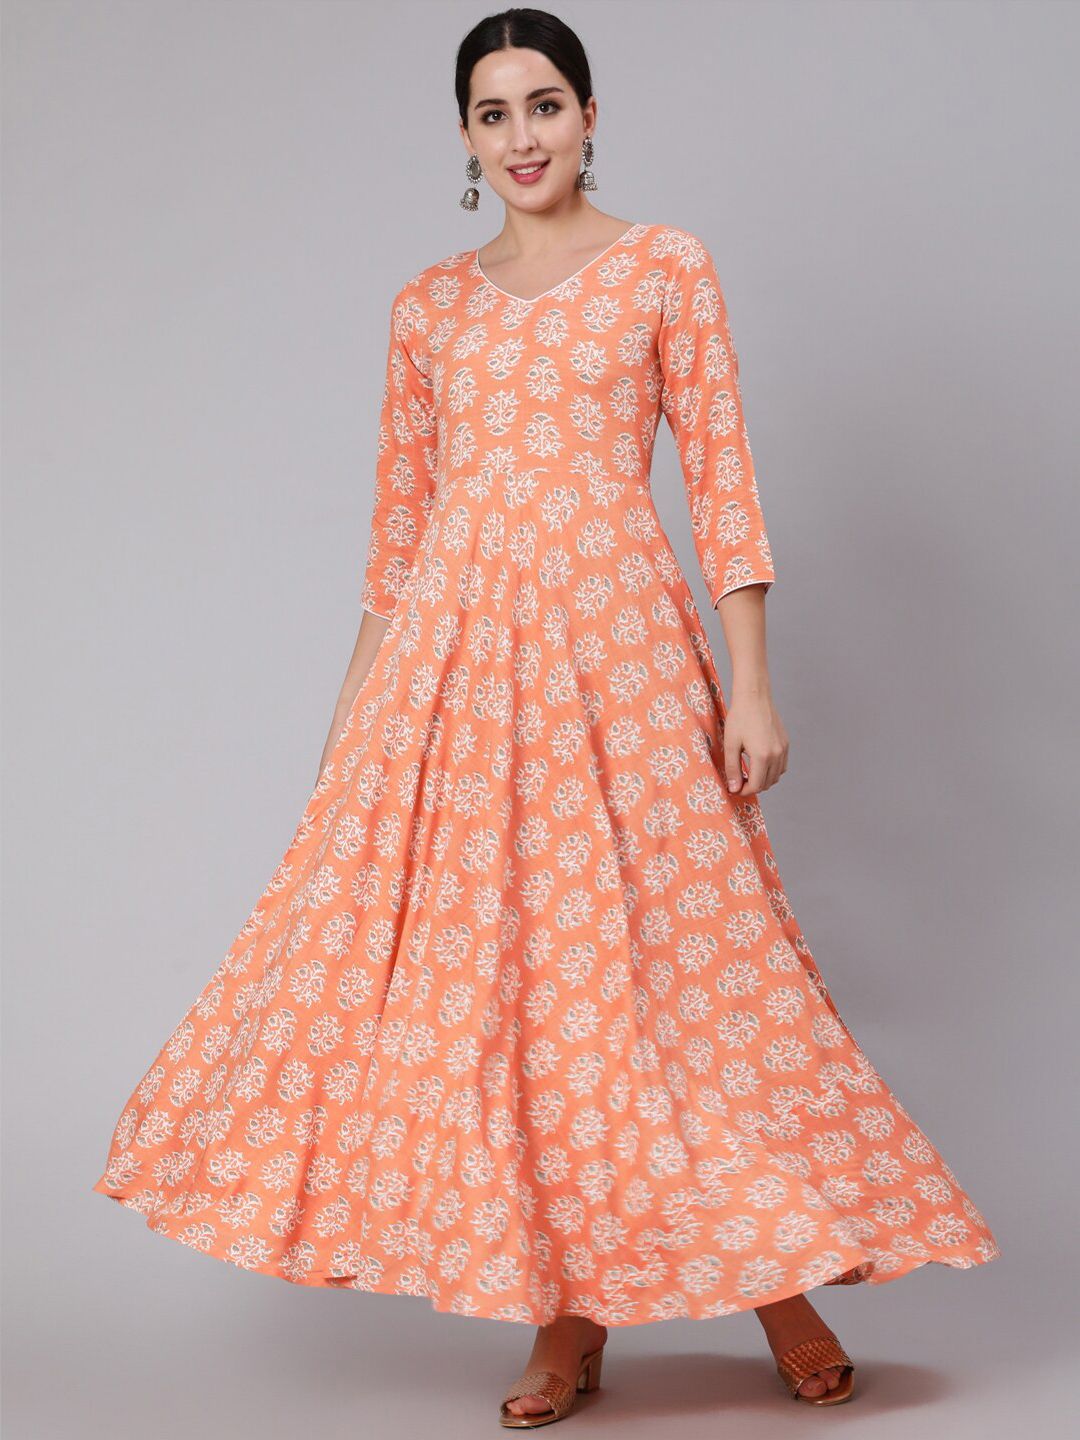 Nayo Peach-Coloured Floral Maxi Dress Price in India